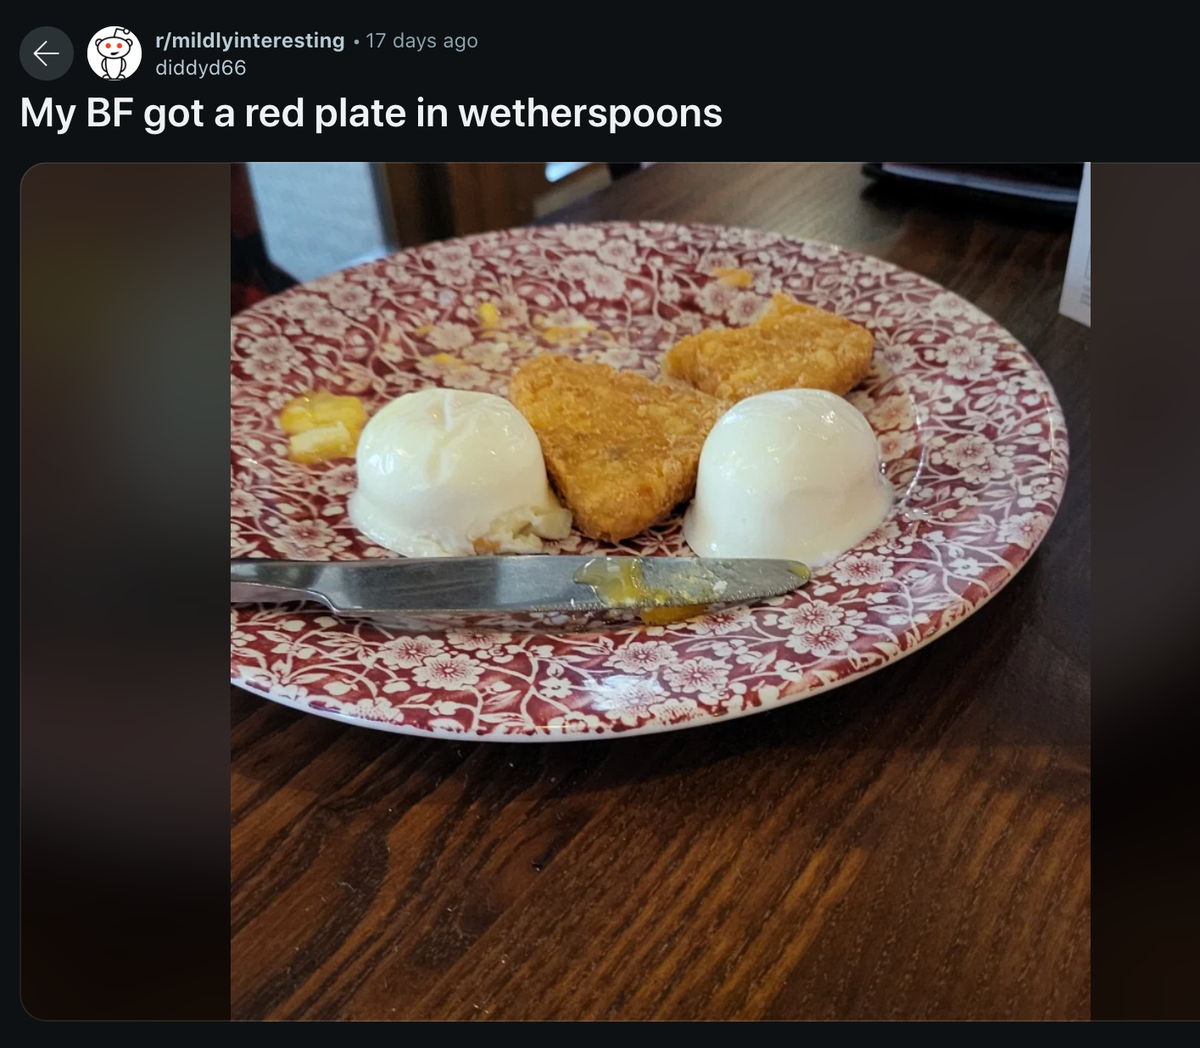 An unusual red plate at Wetherspoons sparked social media conversations galore (Reddit)